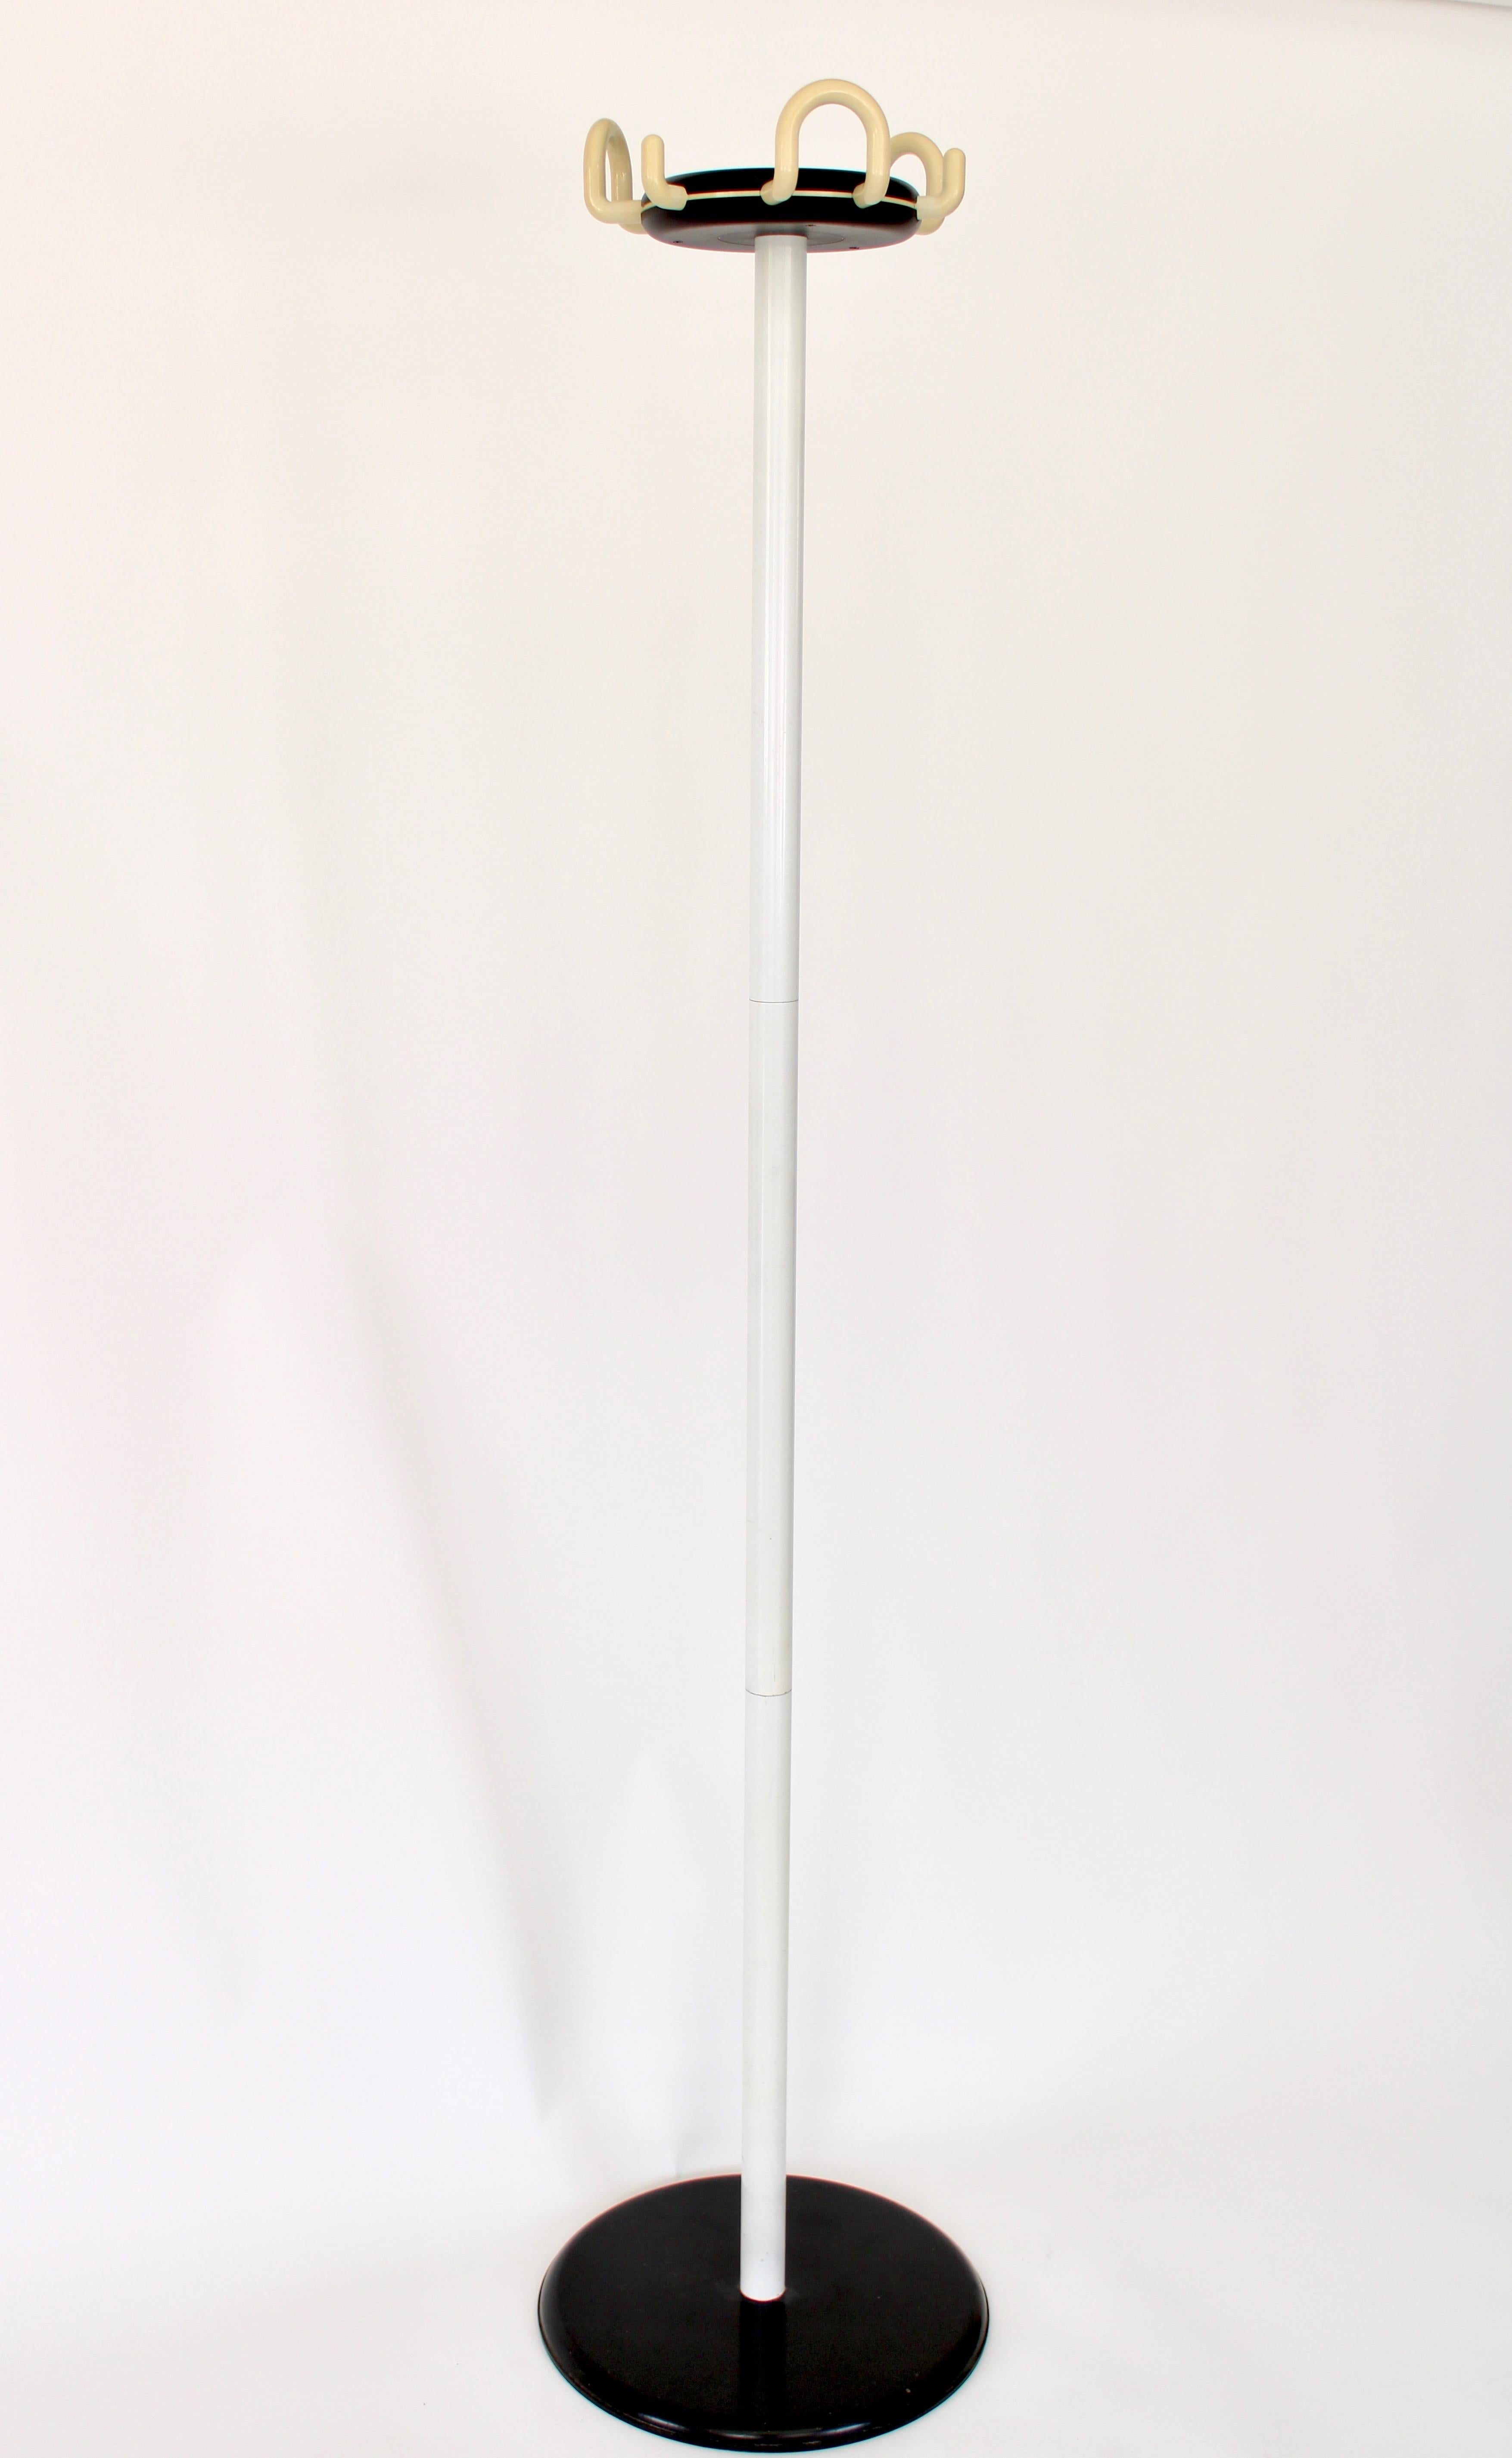 Classic yet always fashionable design coat stand model 999 Aiuto black and white for Rexite by Raul Barberi and Georgio Marianelli.
Head and hooks in engineering polymer plastic, leg in varnished or chromium-plated steel, steel base with